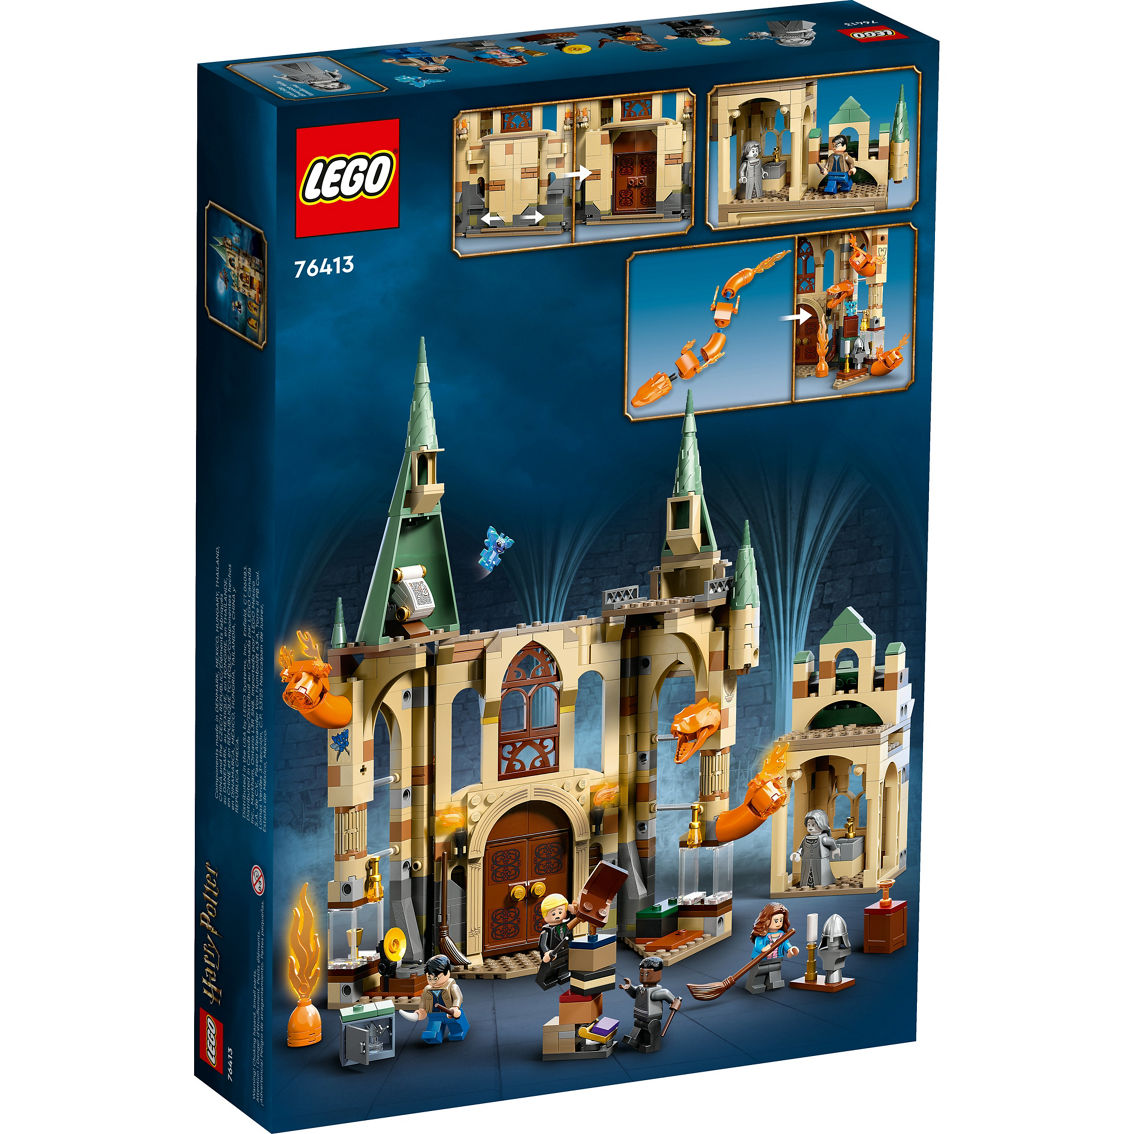 LEGO Harry Potter Hogwarts: Room of Requirement Toy 76413 - Image 3 of 9